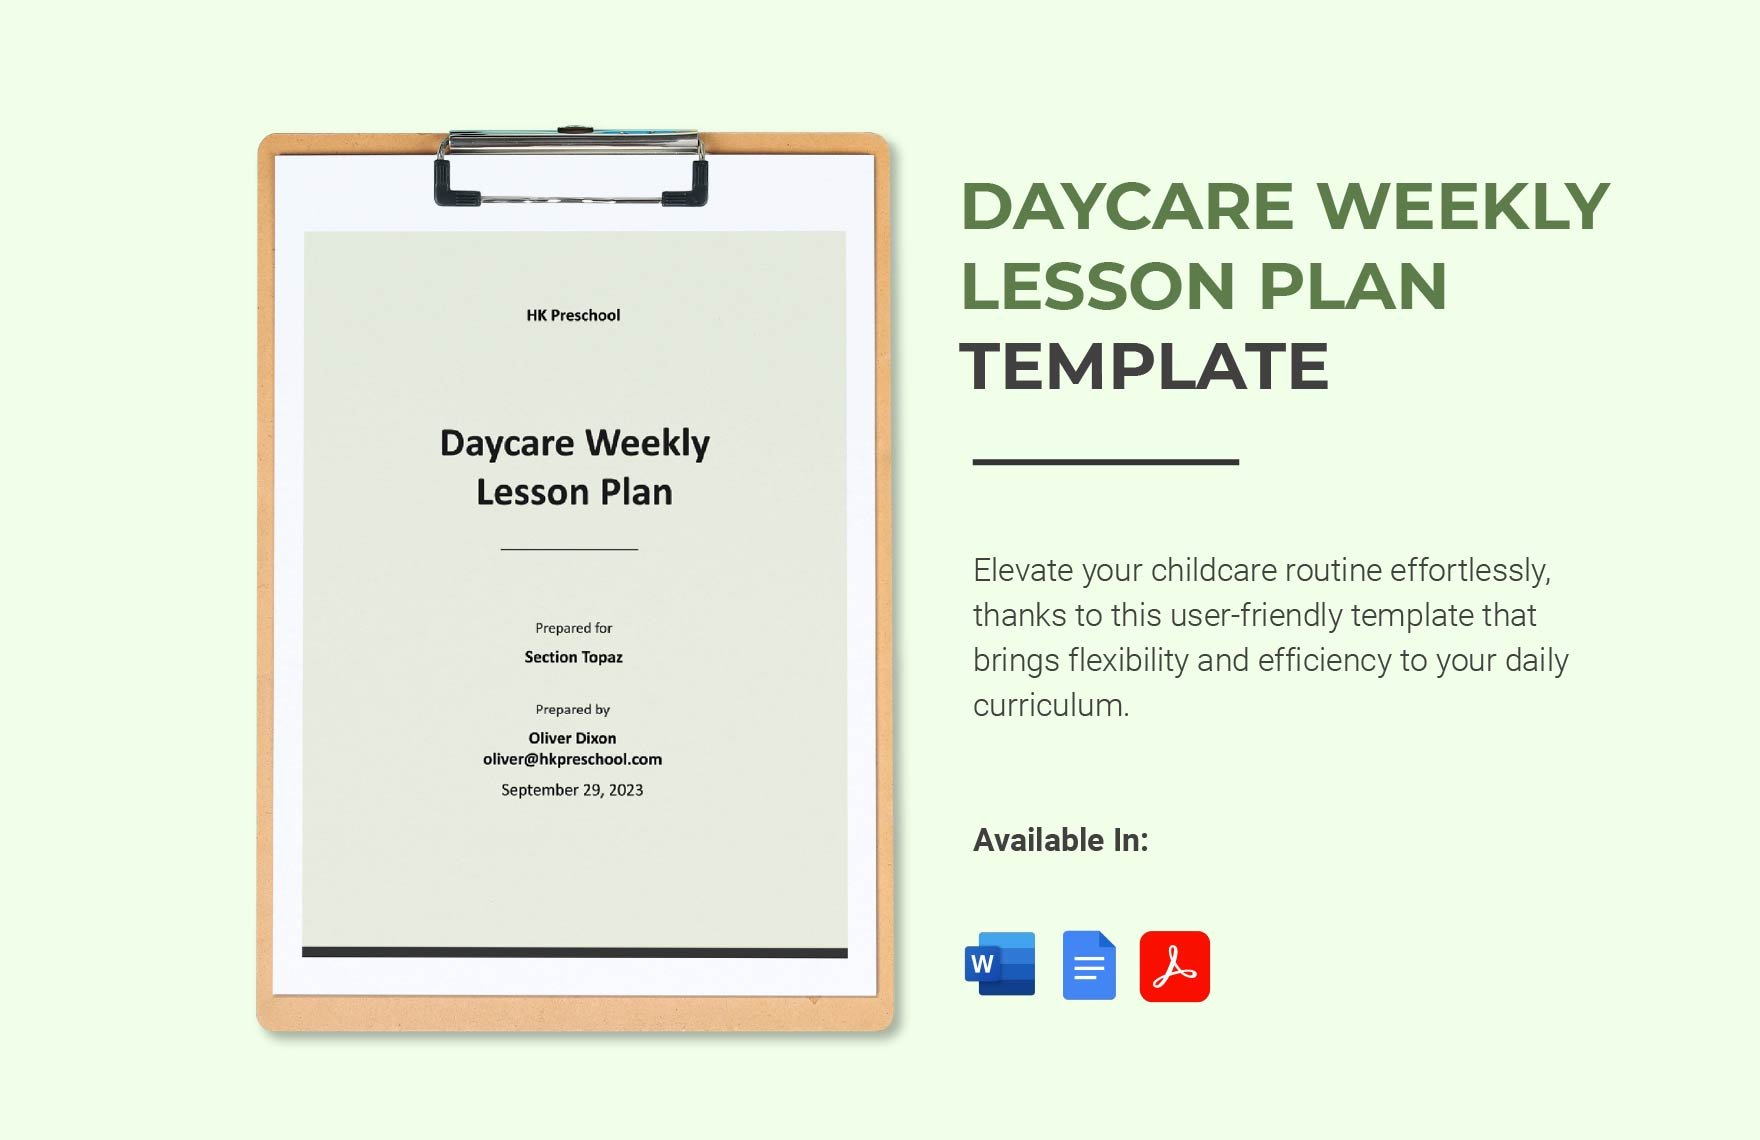 Daycare Weekly Lesson Plan Template